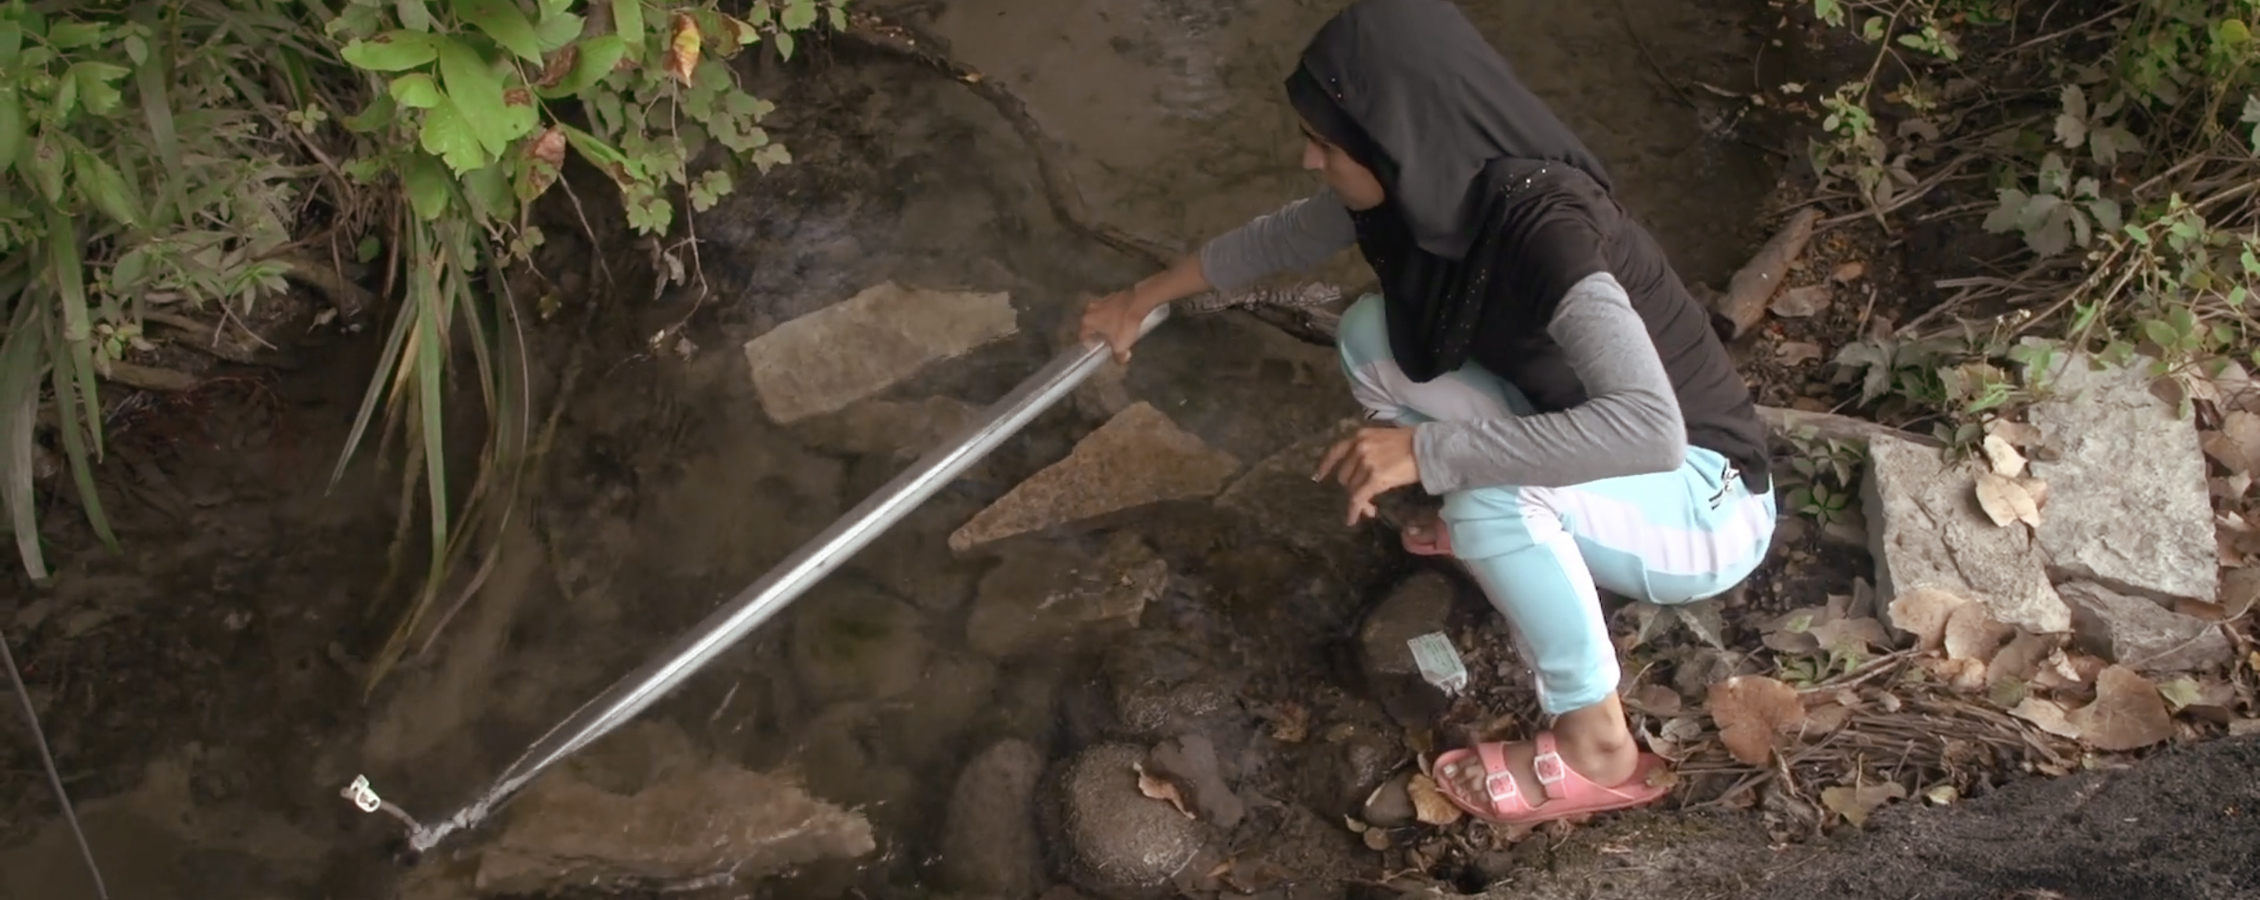 A student uses a tool to test water in a creek.